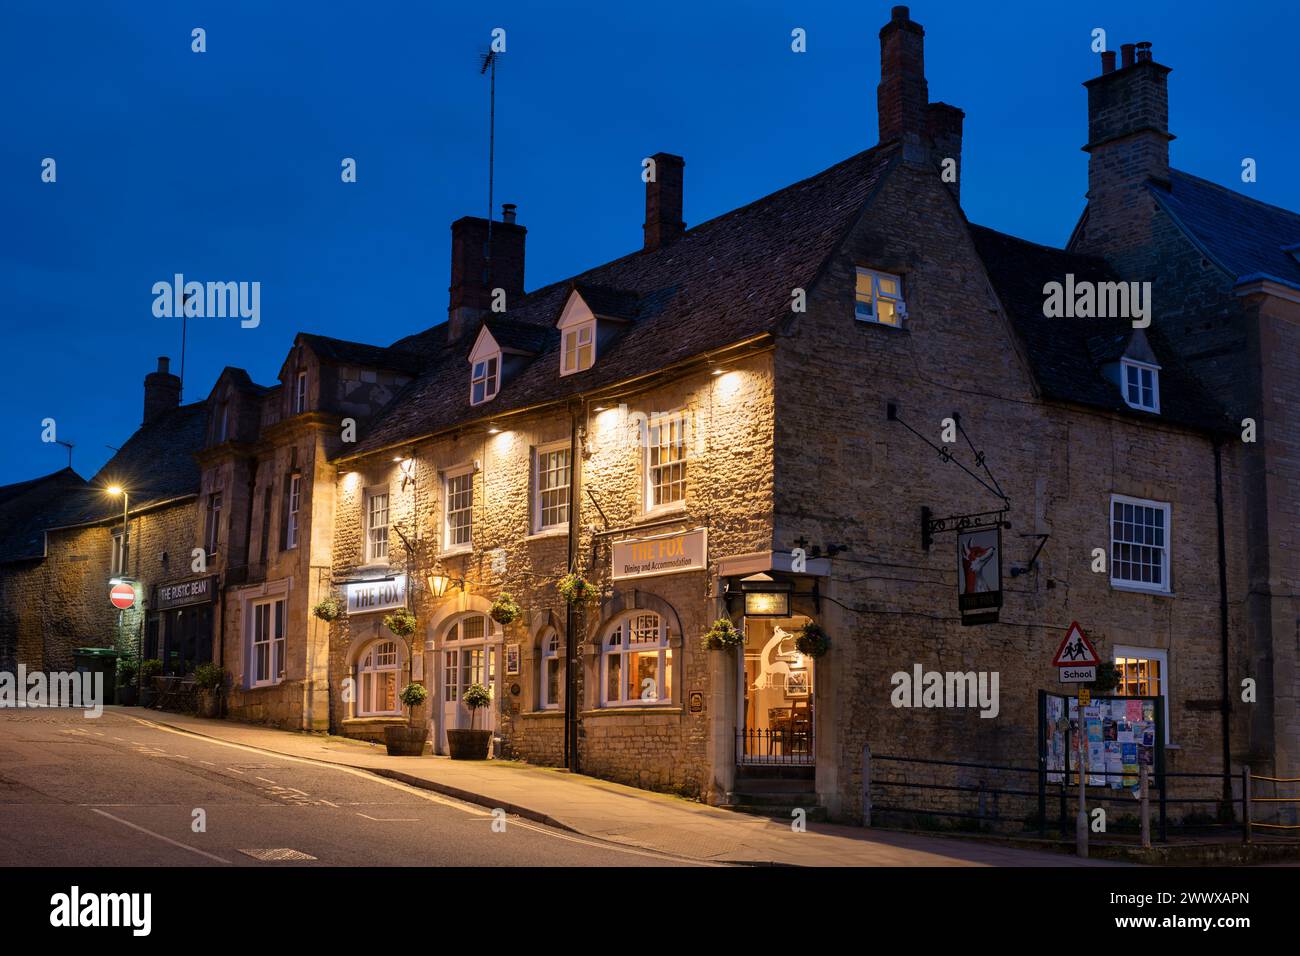 The Fox Inn in the market place at dawn. Chipping norton, Cotswolds, Oxfordshire, England Stock Photo